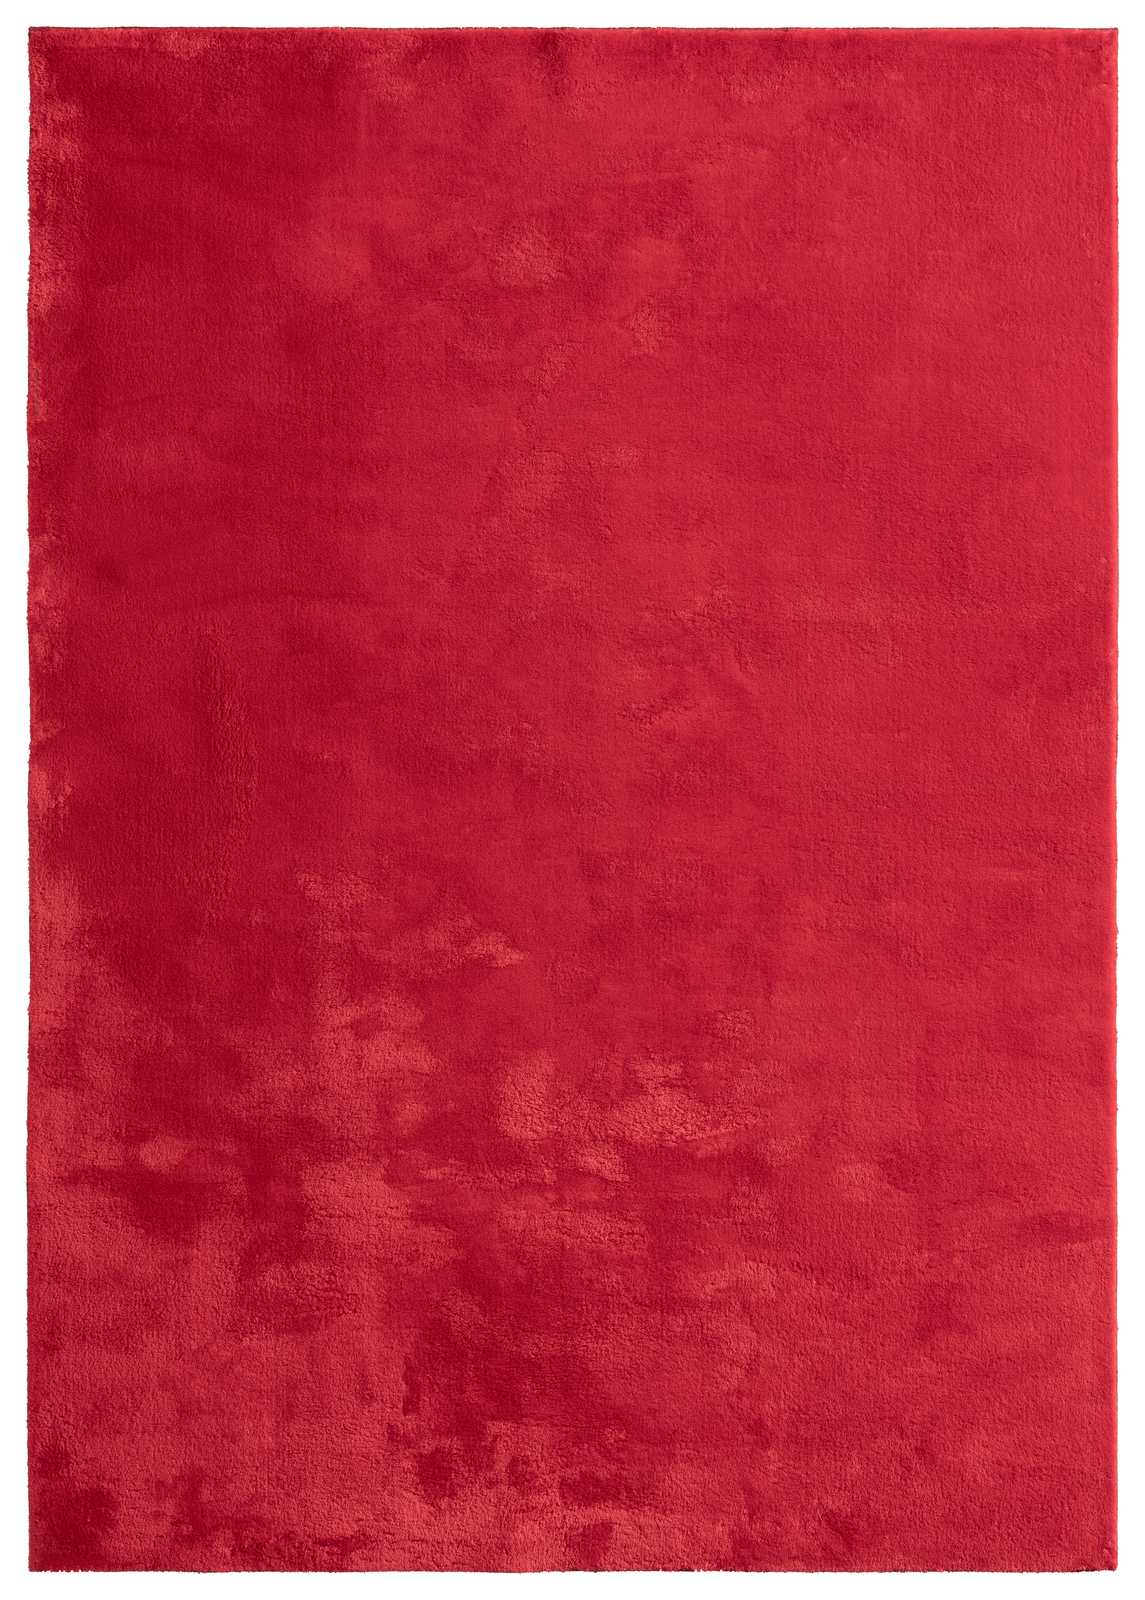             Extra soft high pile carpet in red - 230 x 160 cm
        